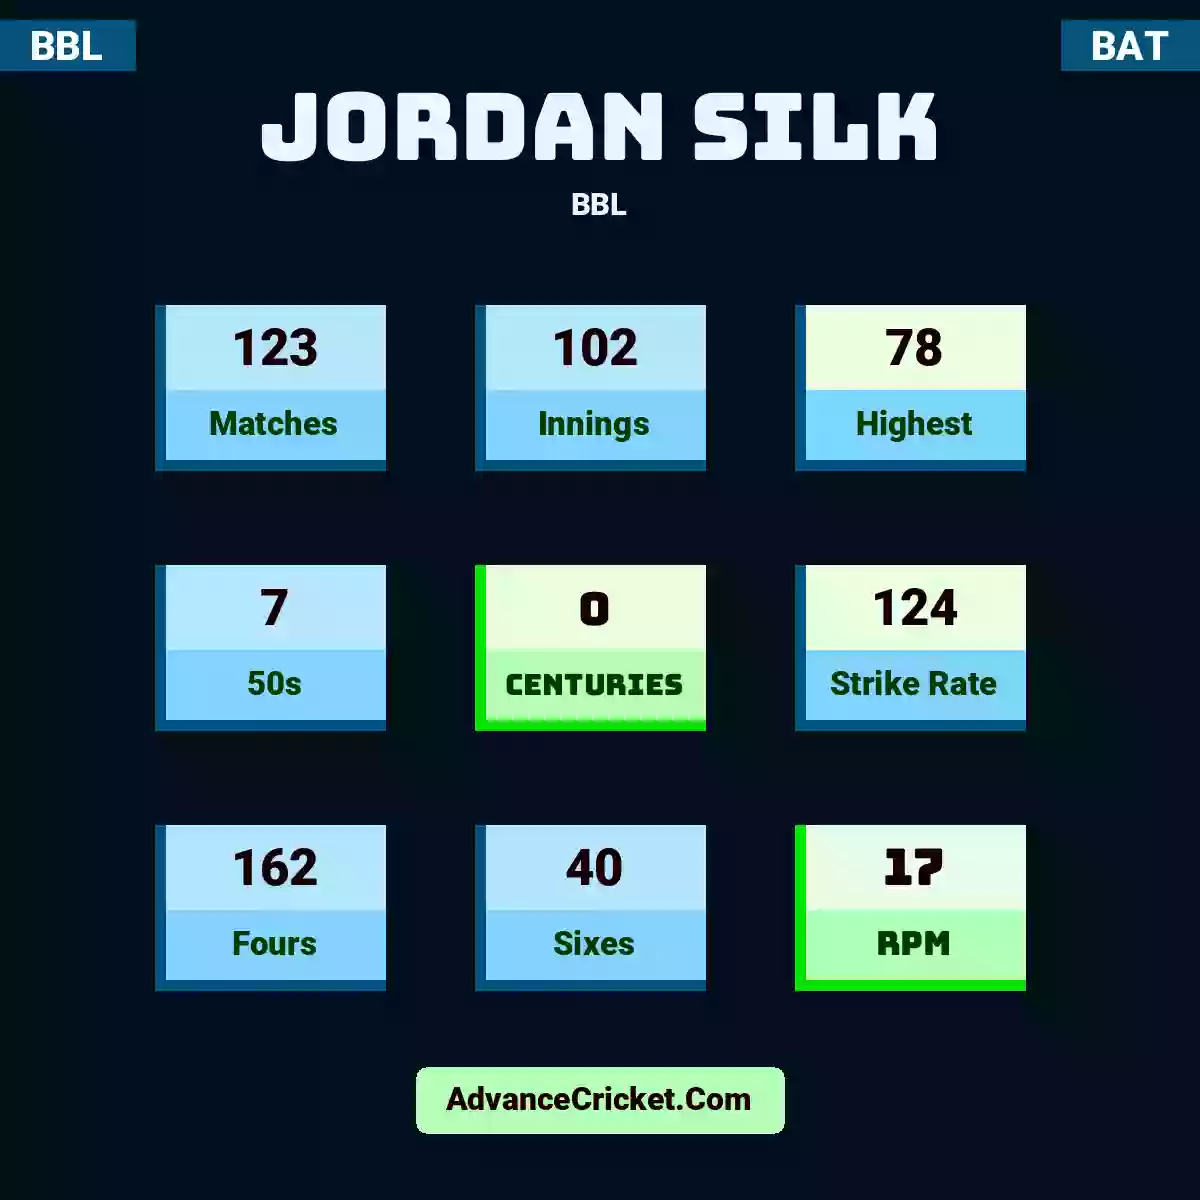 Jordan Silk BBL , Jordan Silk played 123 matches, scored 78 runs as highest, 7 half-centuries, and 0 centuries, with a strike rate of 124. J.Silk hit 162 fours and 40 sixes, with an RPM of 17.